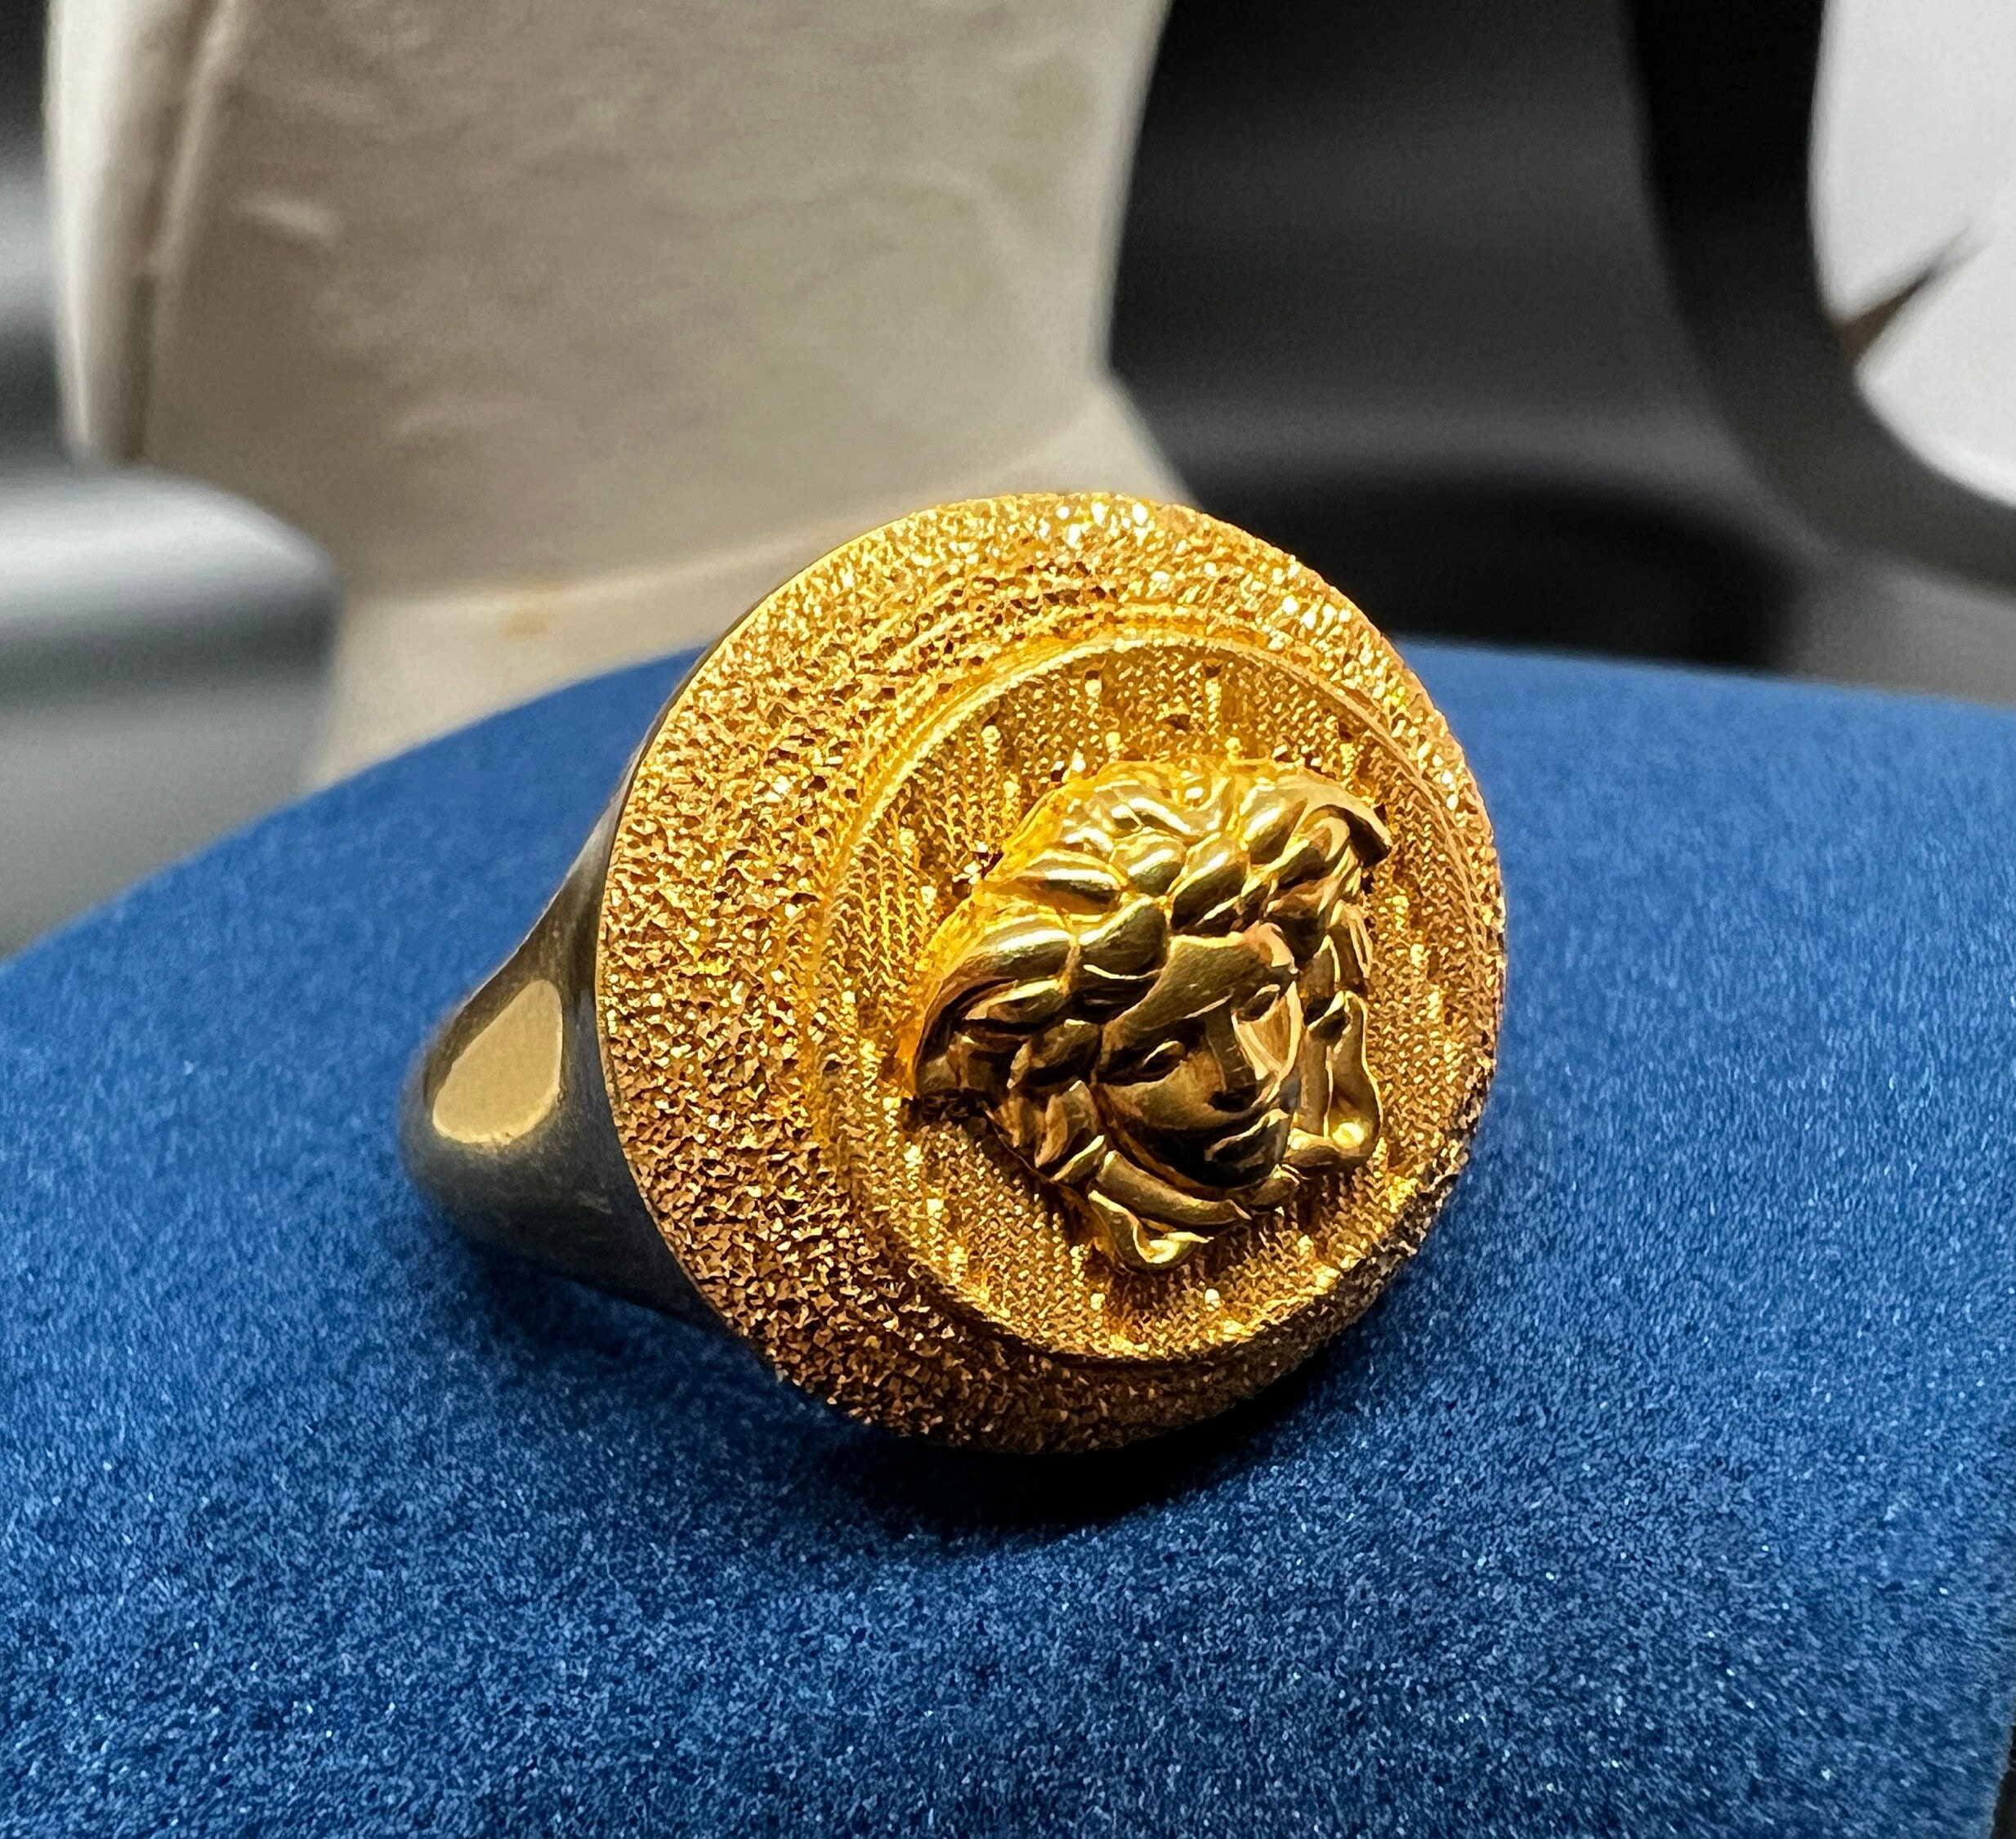 Vintage Gianni Versace Medusa Head Ring Made in Italy - Ruby Lane